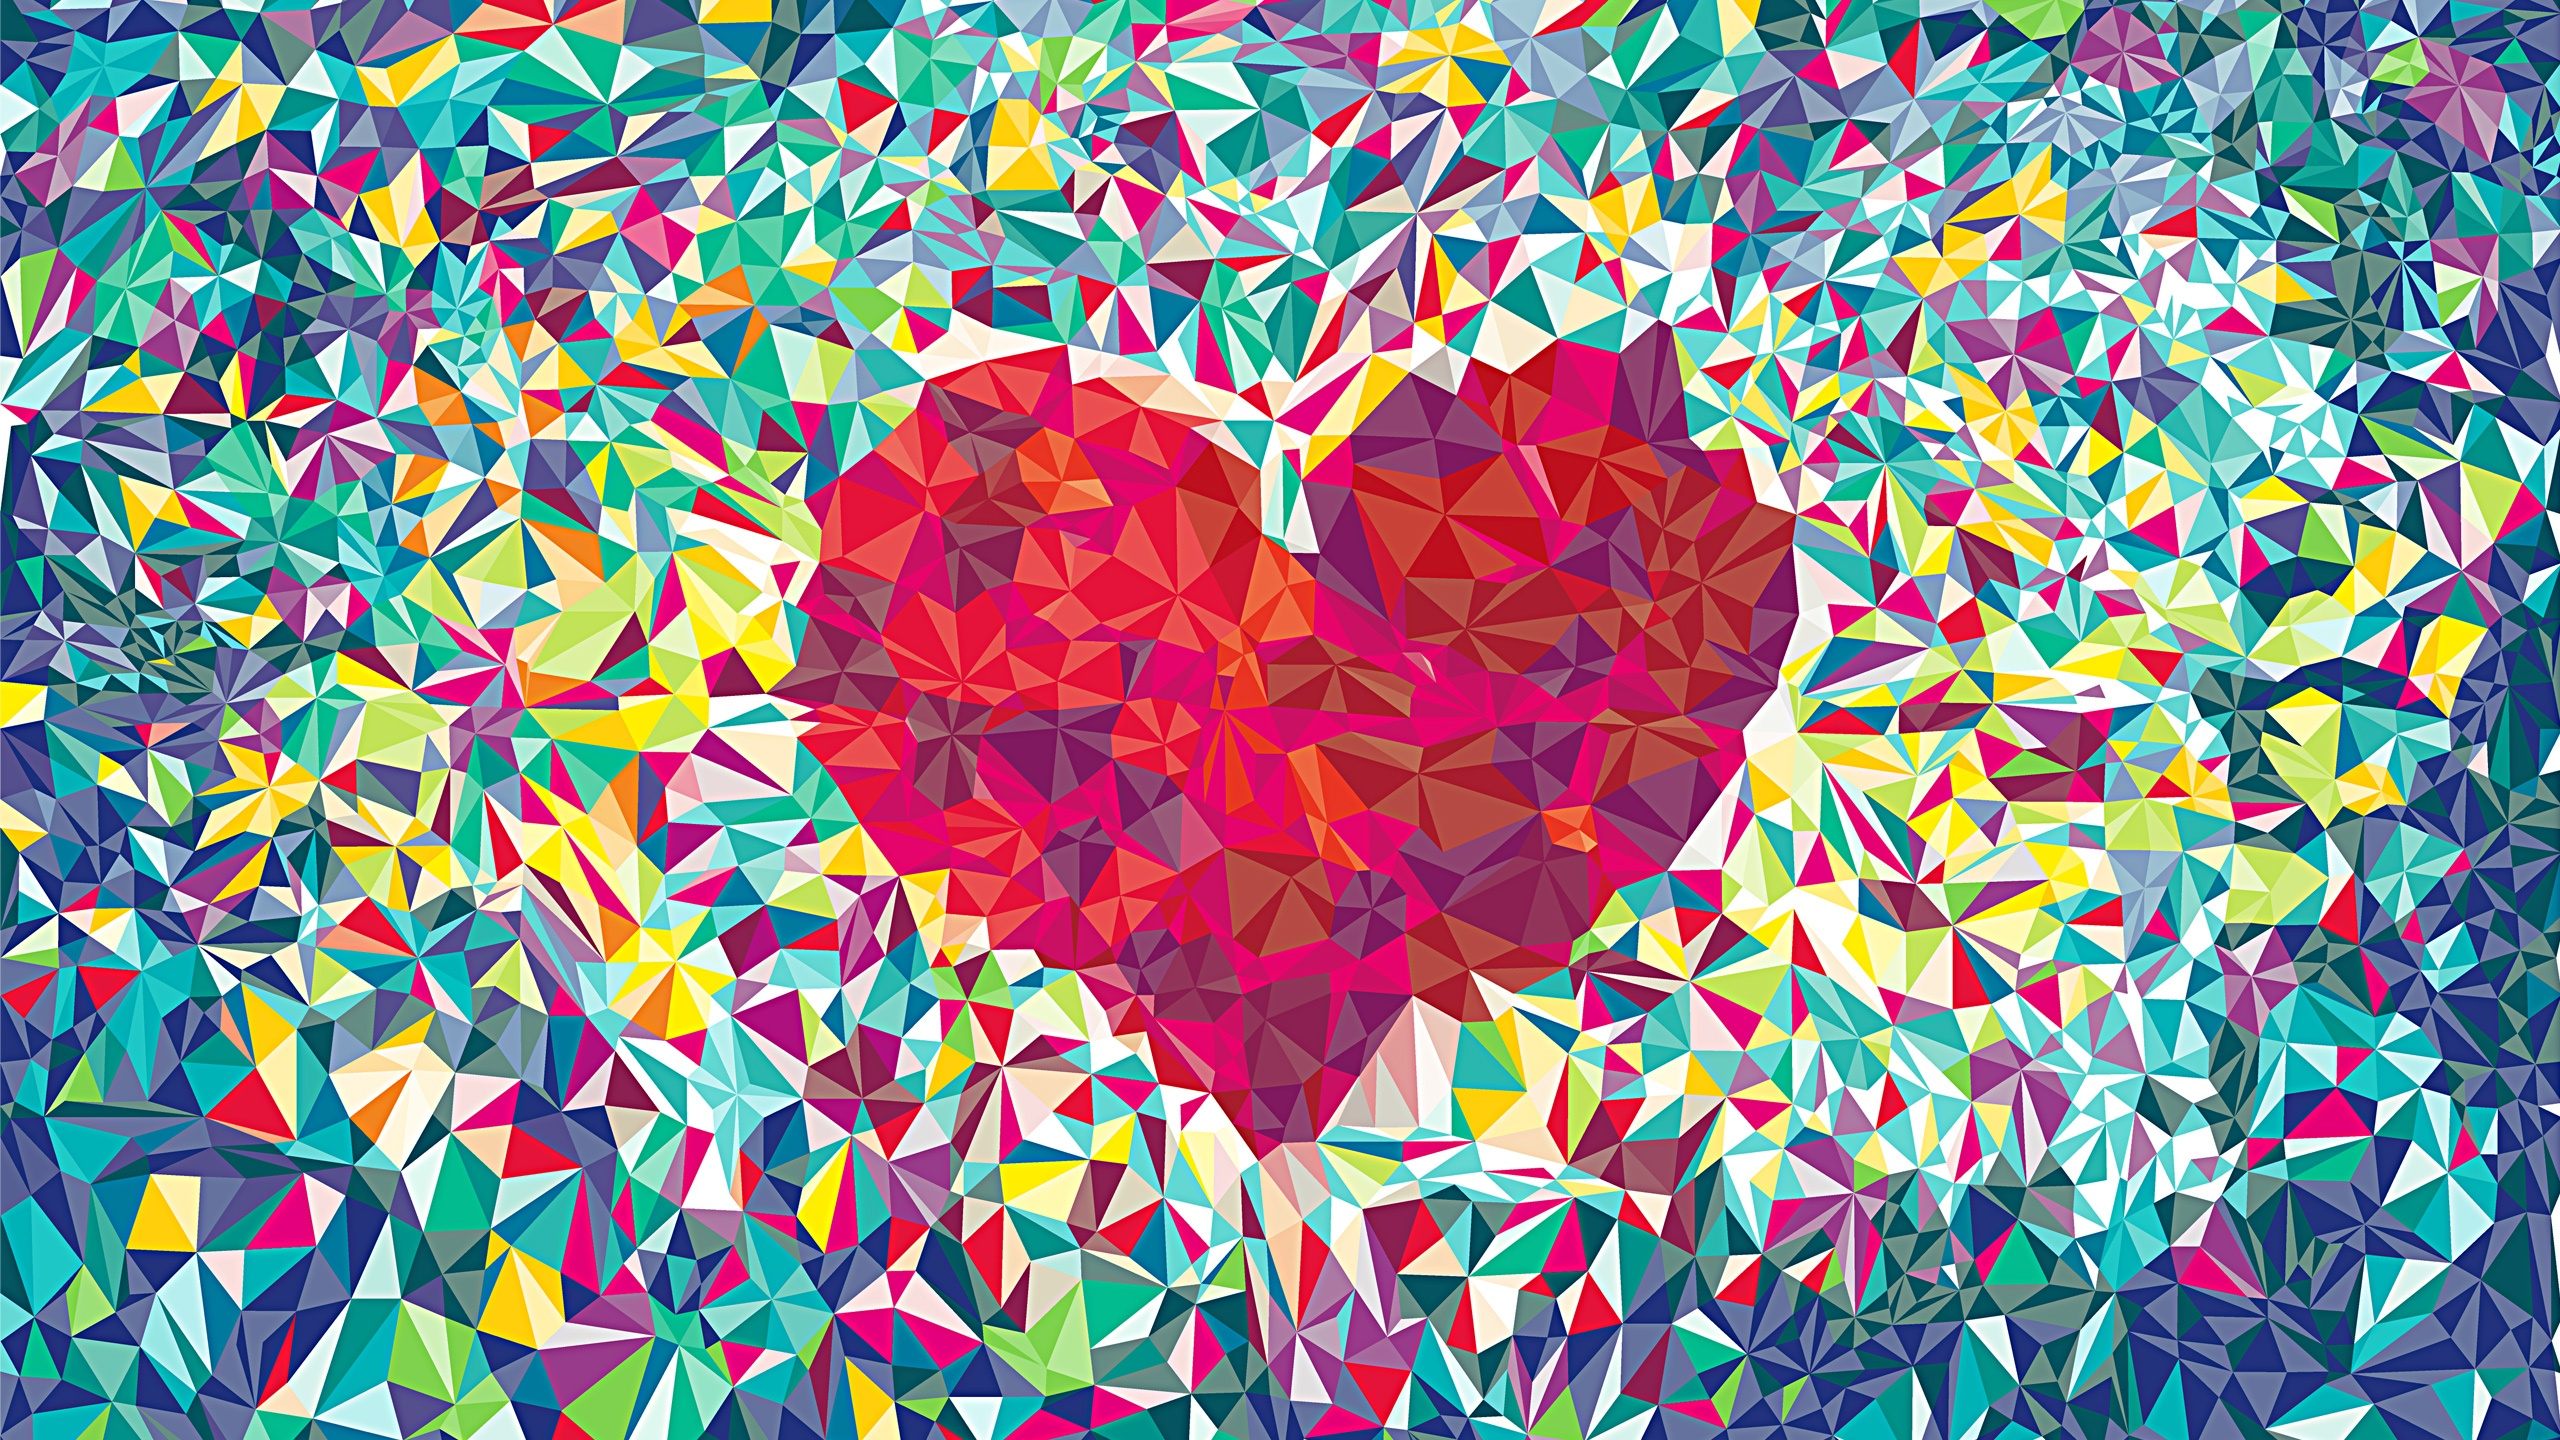 colorful wallpaper hd,pattern,psychedelic art,heart,design,colorfulness